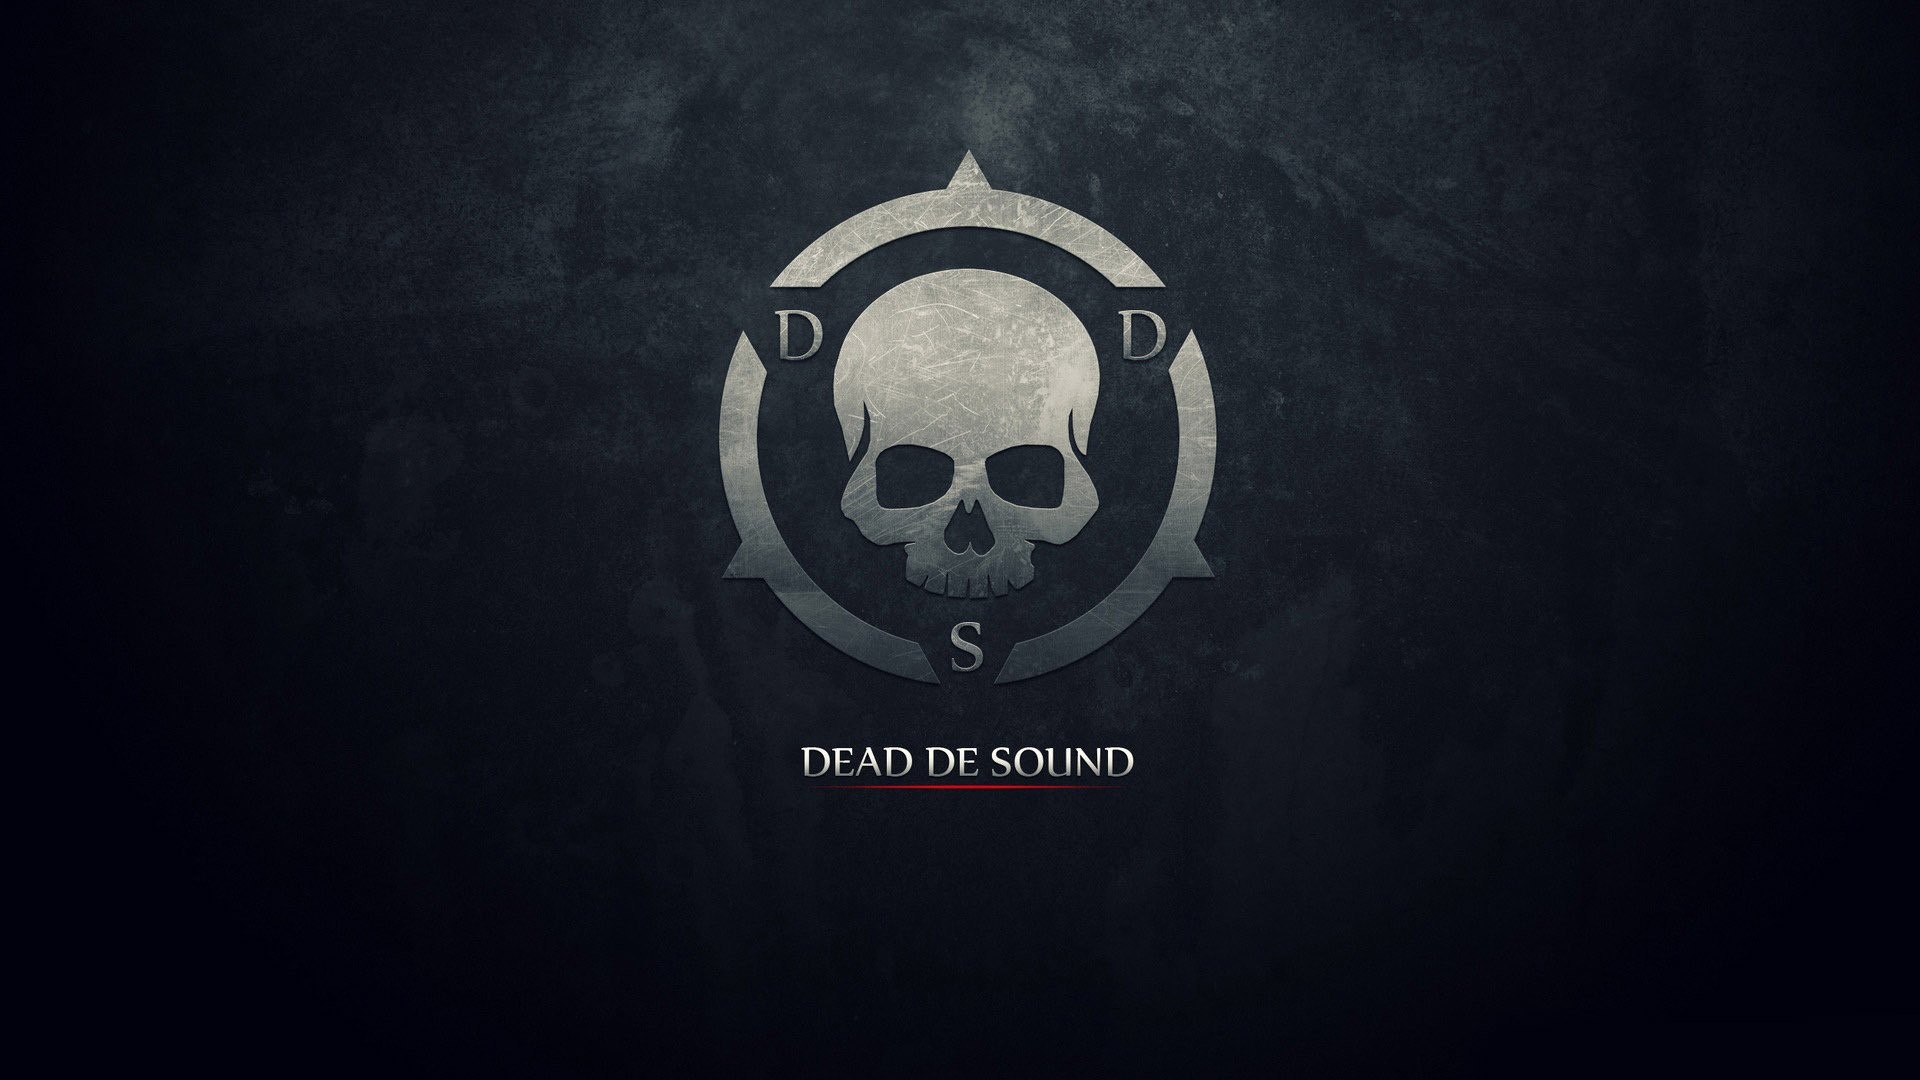 1920x1080 Search Results for “dead de sound wallpaper” – Adorable Wallpapers